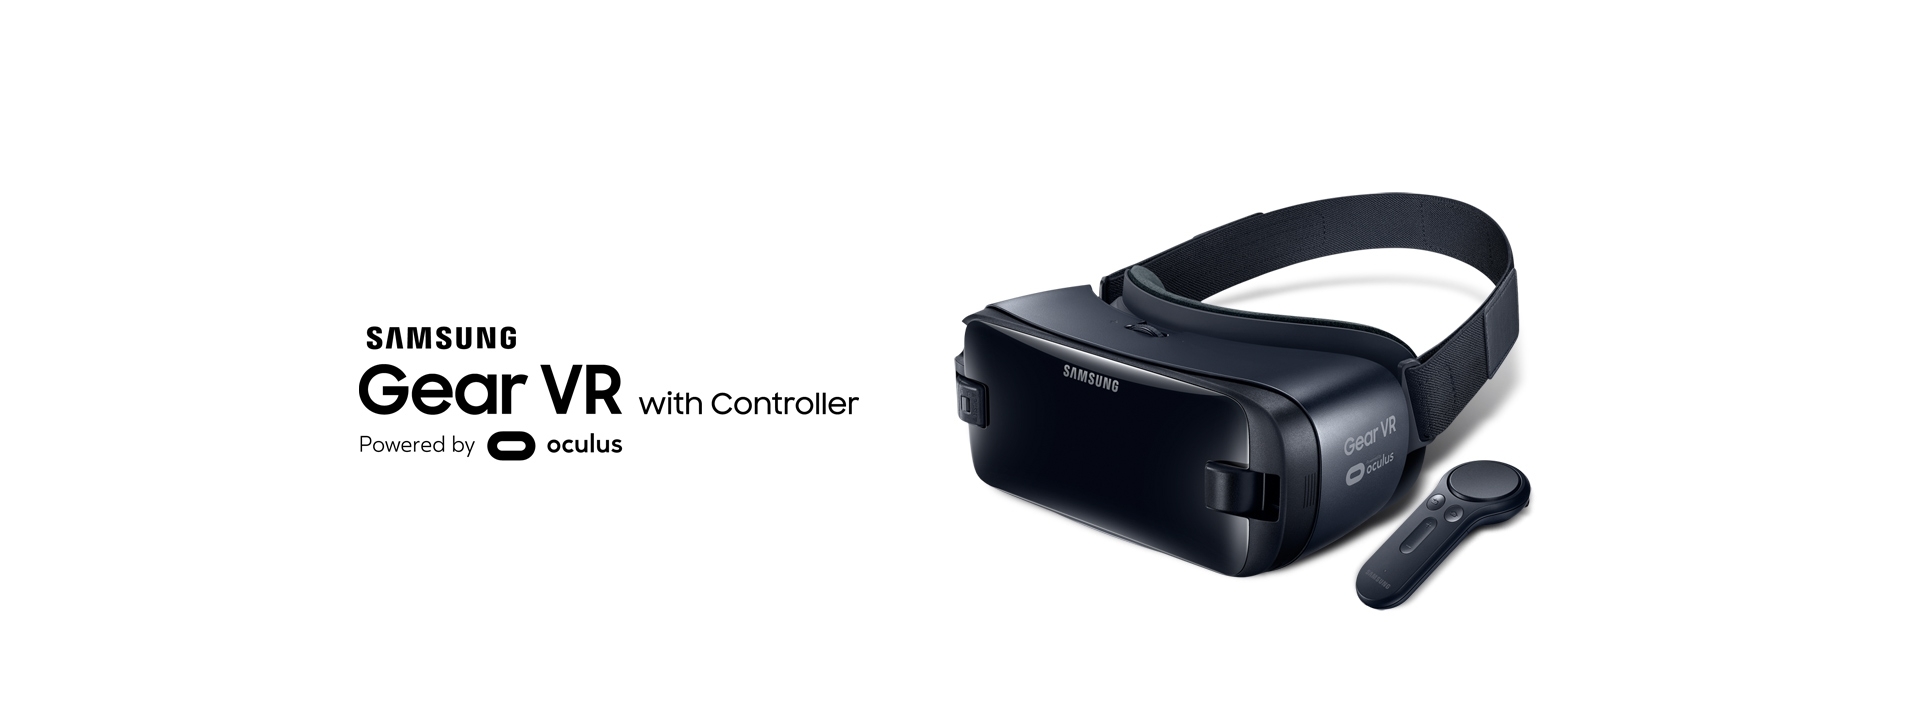 Samsung Gear VR with Controller Powered by oculus